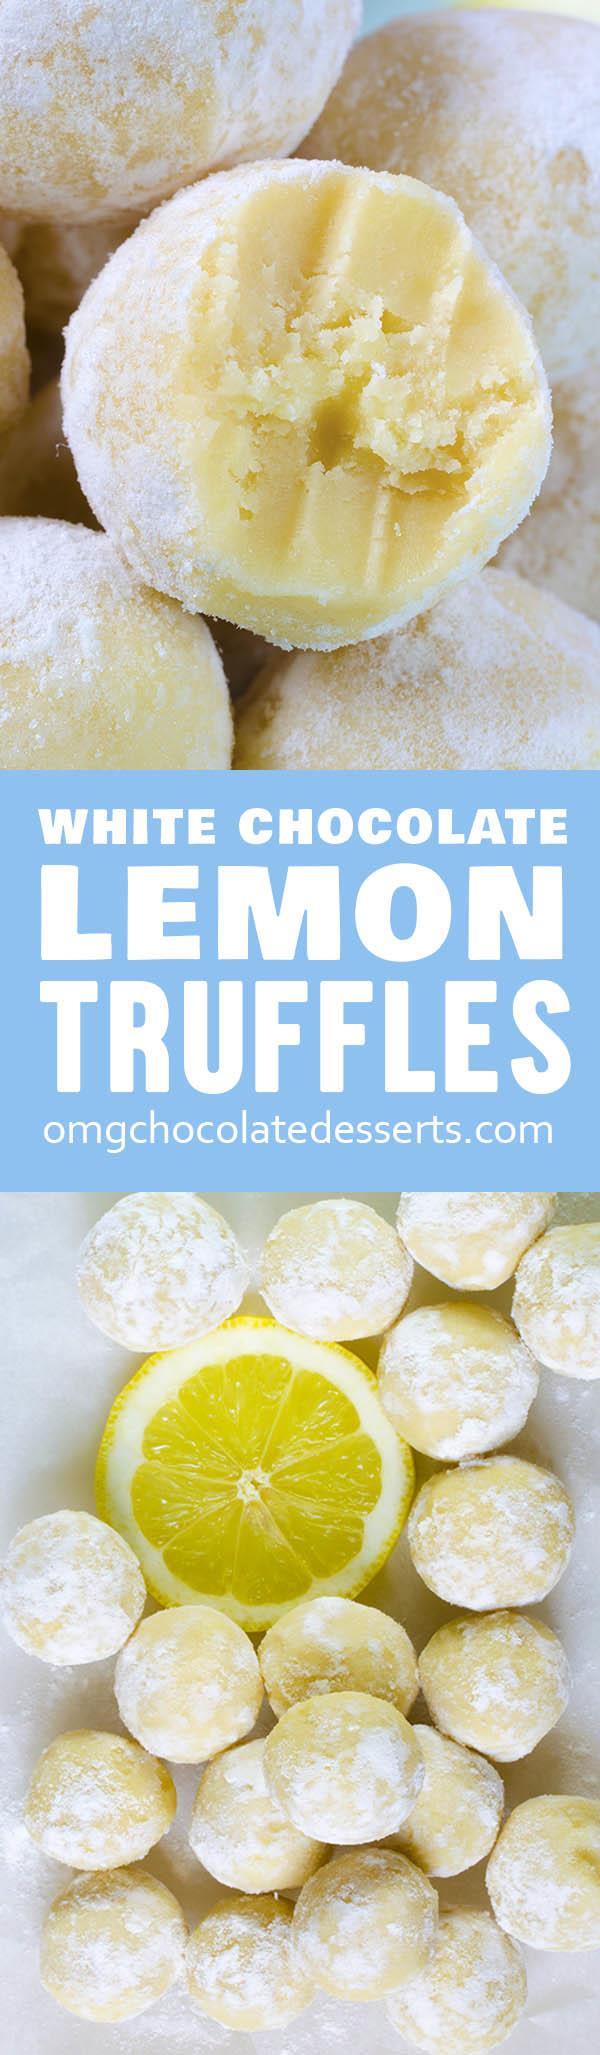 These easy Lemon Truffles with white chocolate will melt-in-your-mouth! Three ingredients, no baking required, and you'll have recipe for perfection.